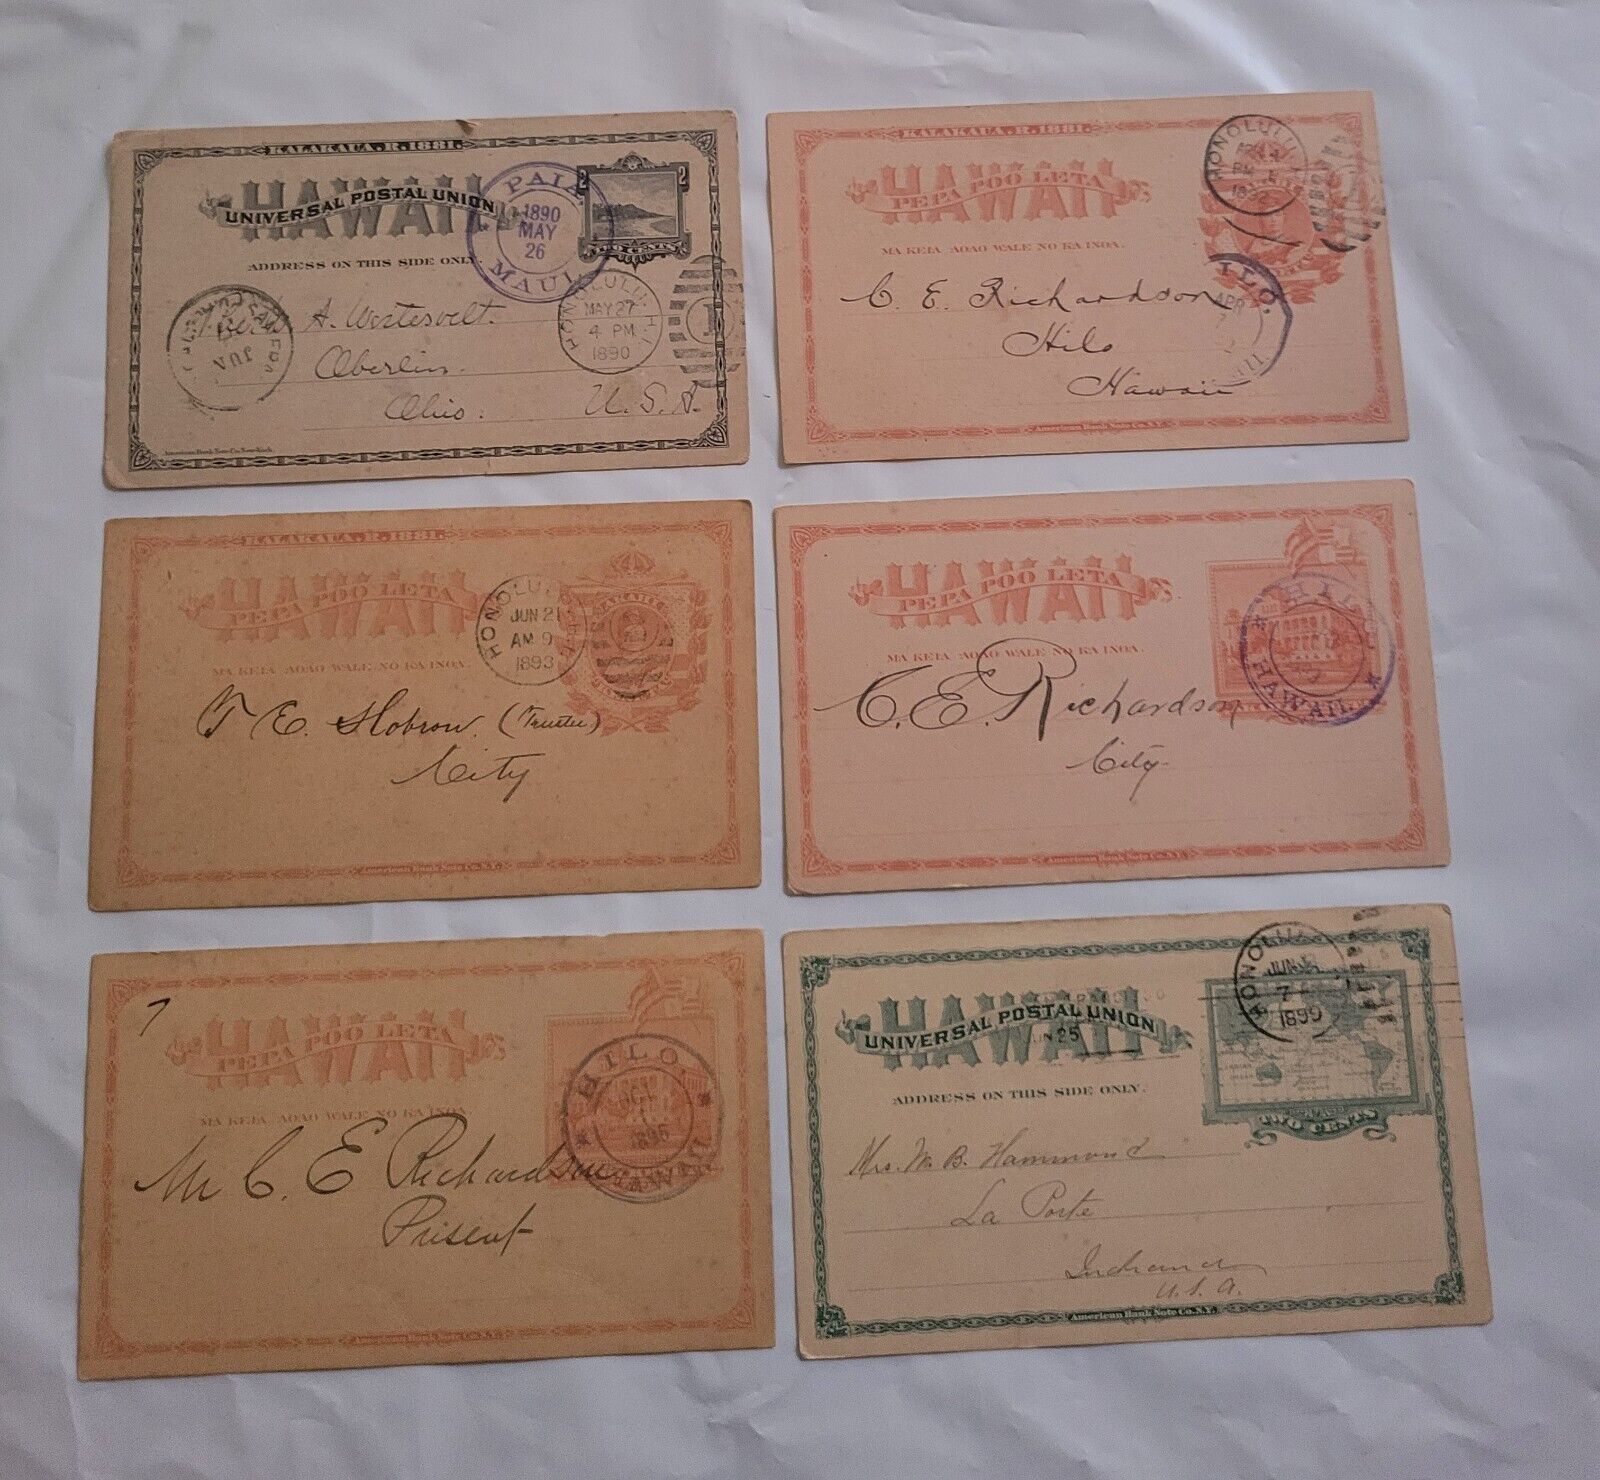 Early Hawaii Postal Cards - Lot of 6 Circulated Cards